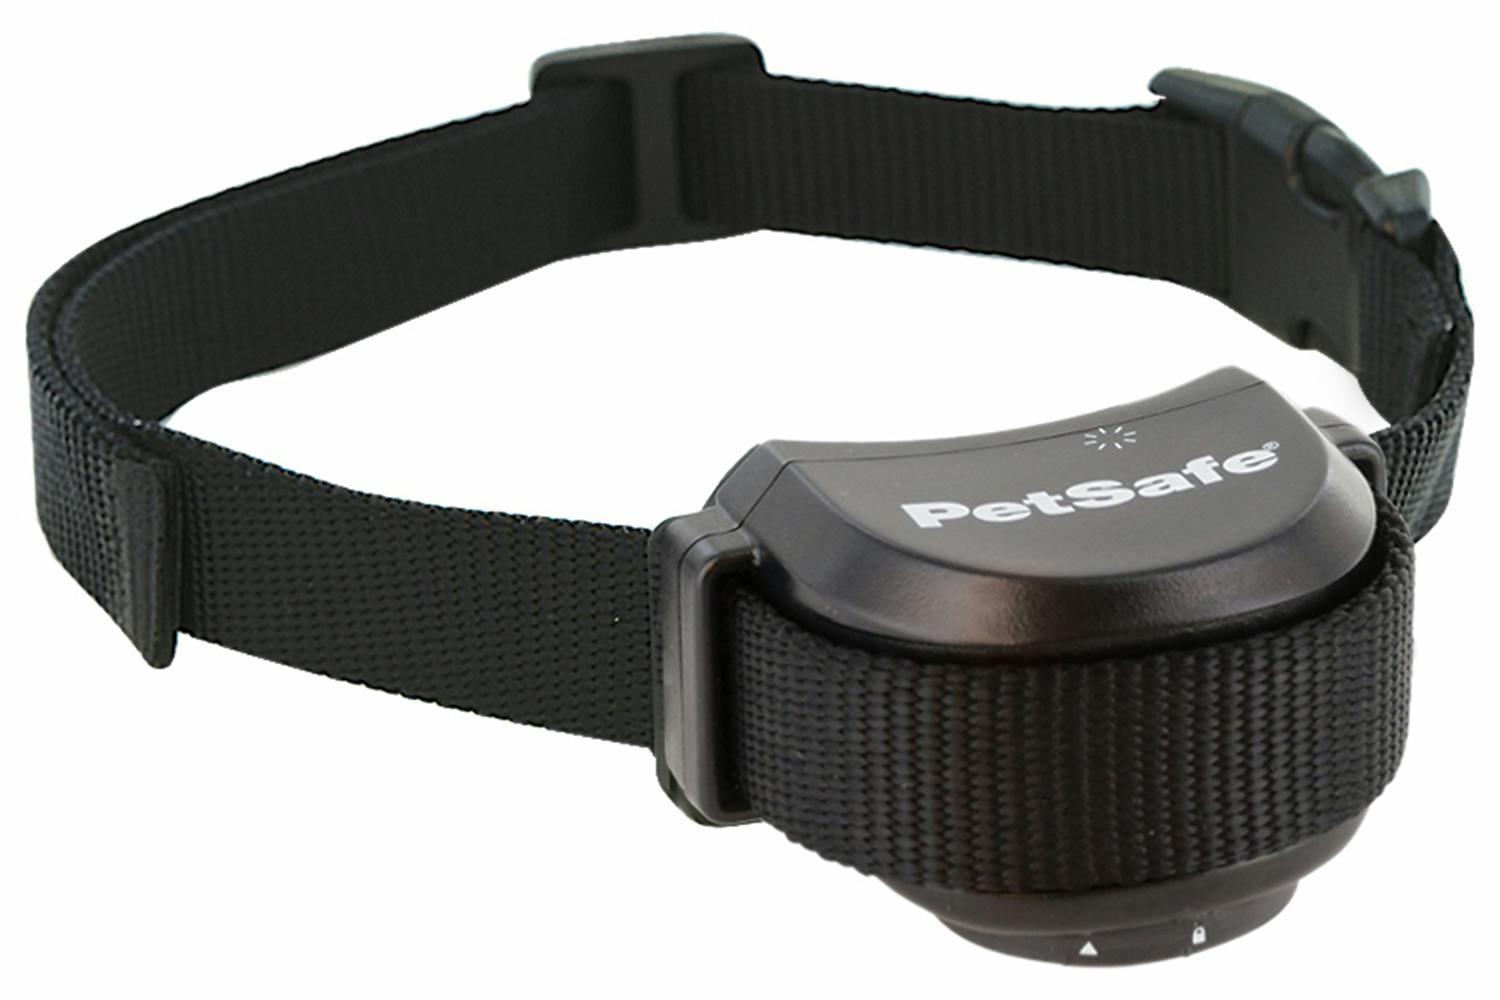 Add-A-Dog® collars and replacement parts for PetSafe® fences